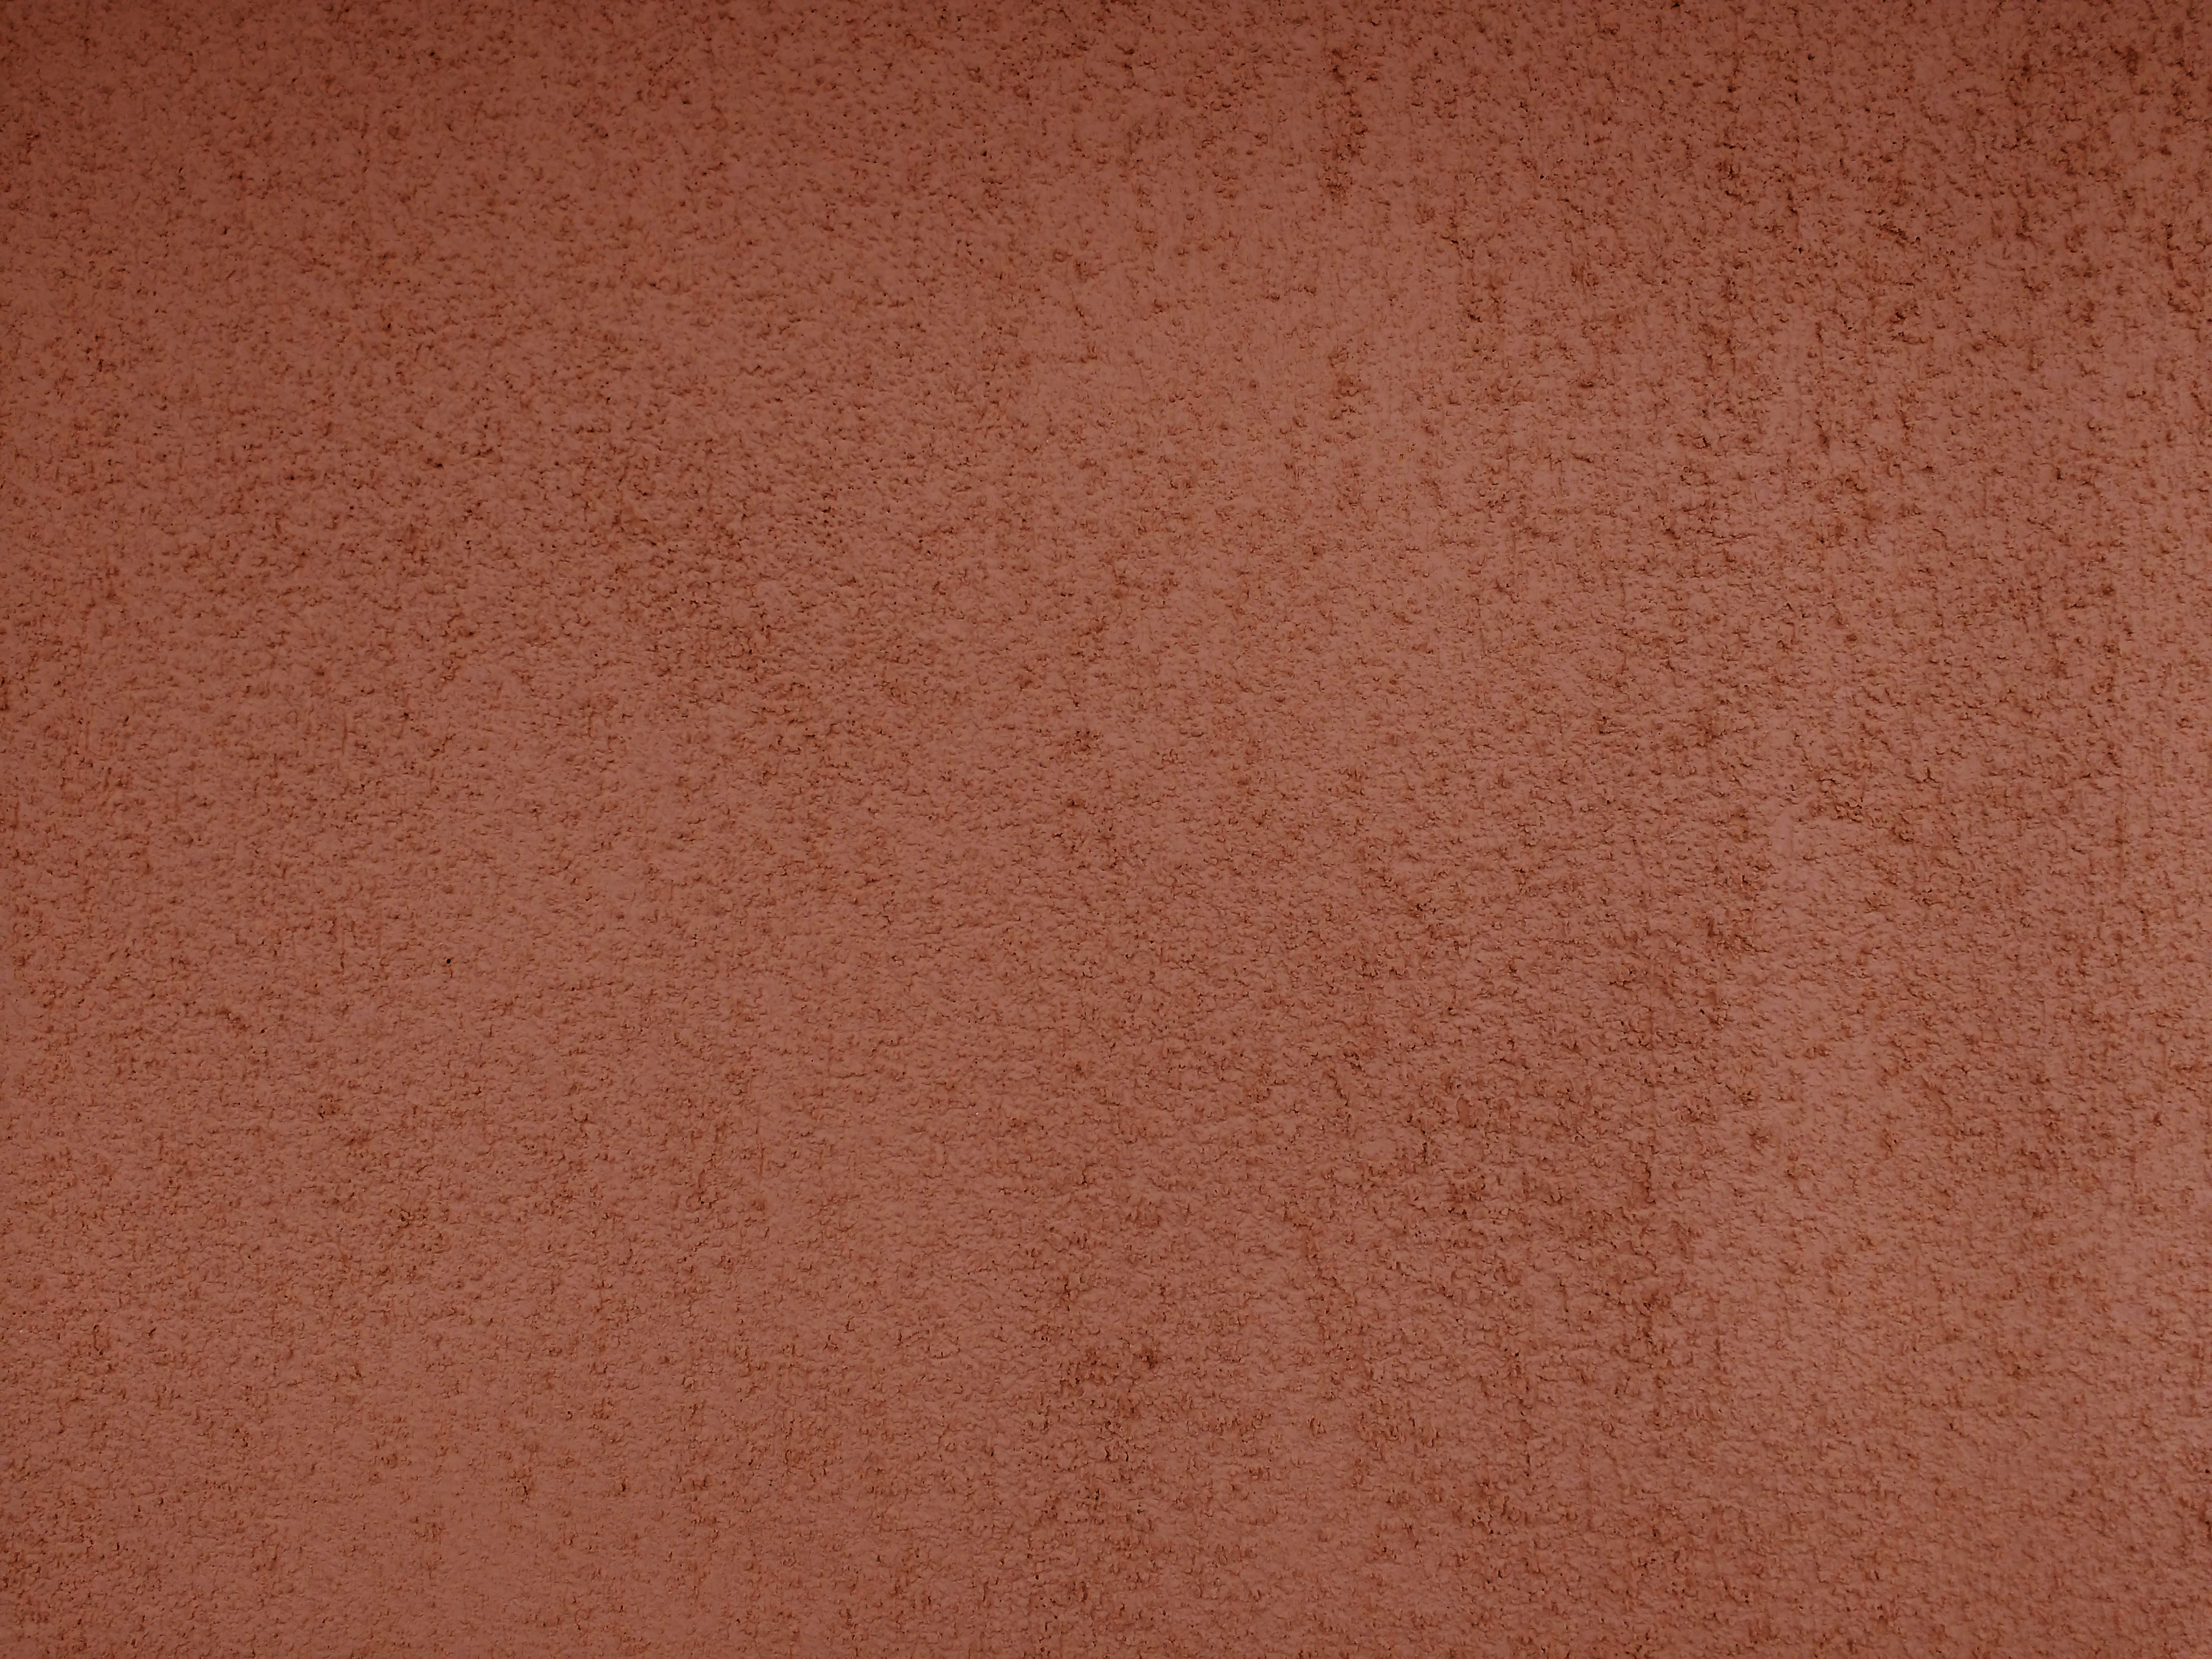 Terra Cotta Stucco  Texture  Picture Free Photograph 